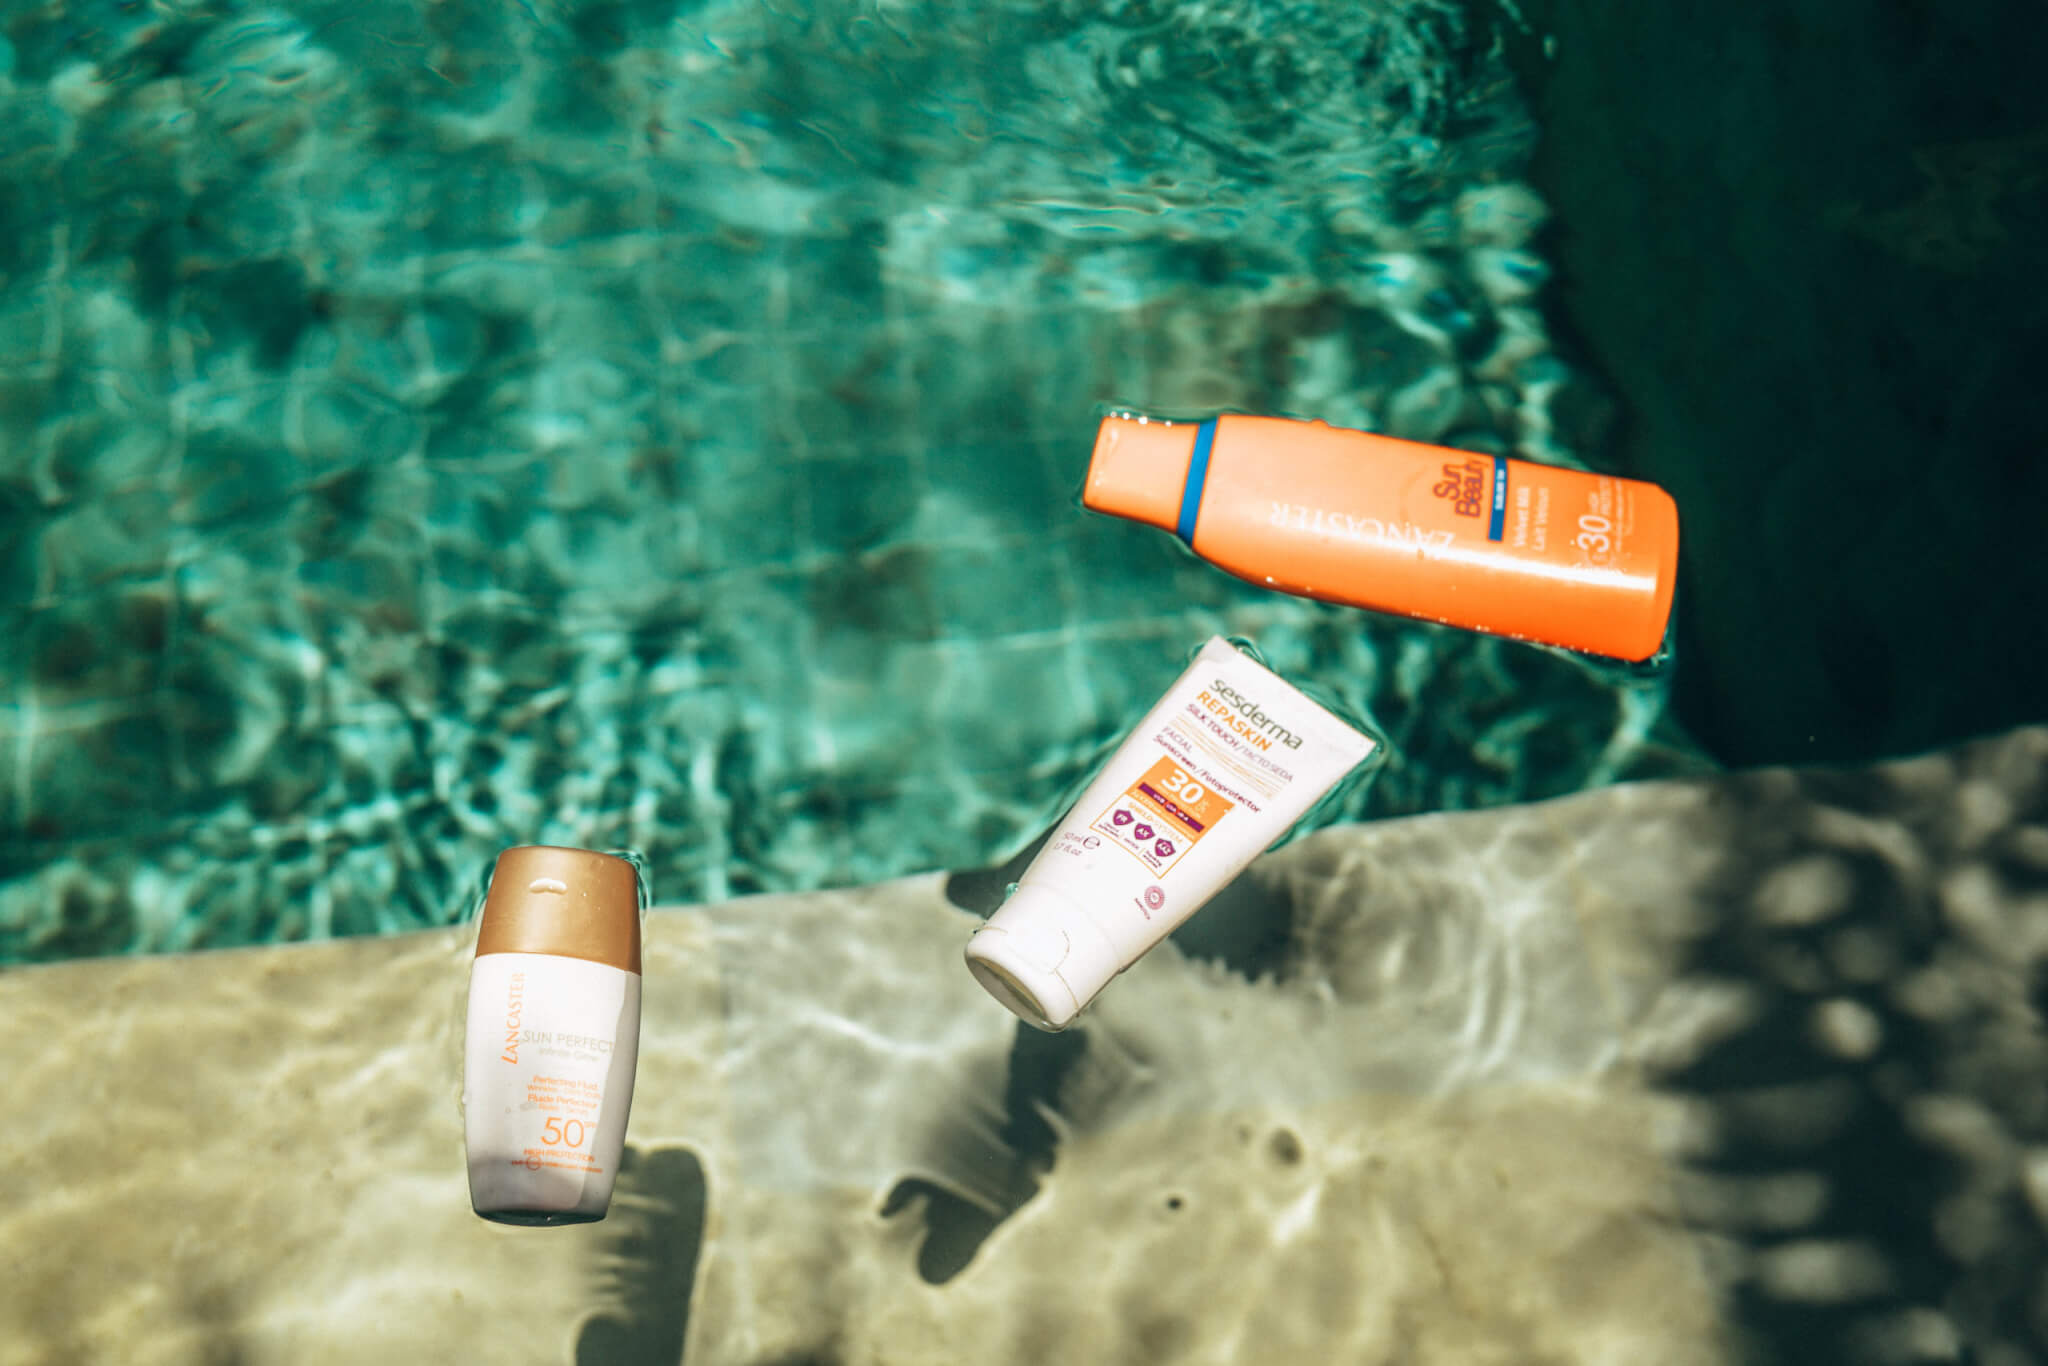 All-you-need-to-know-about-SPF-3-of-4-scaled Everything you need to know about SPF